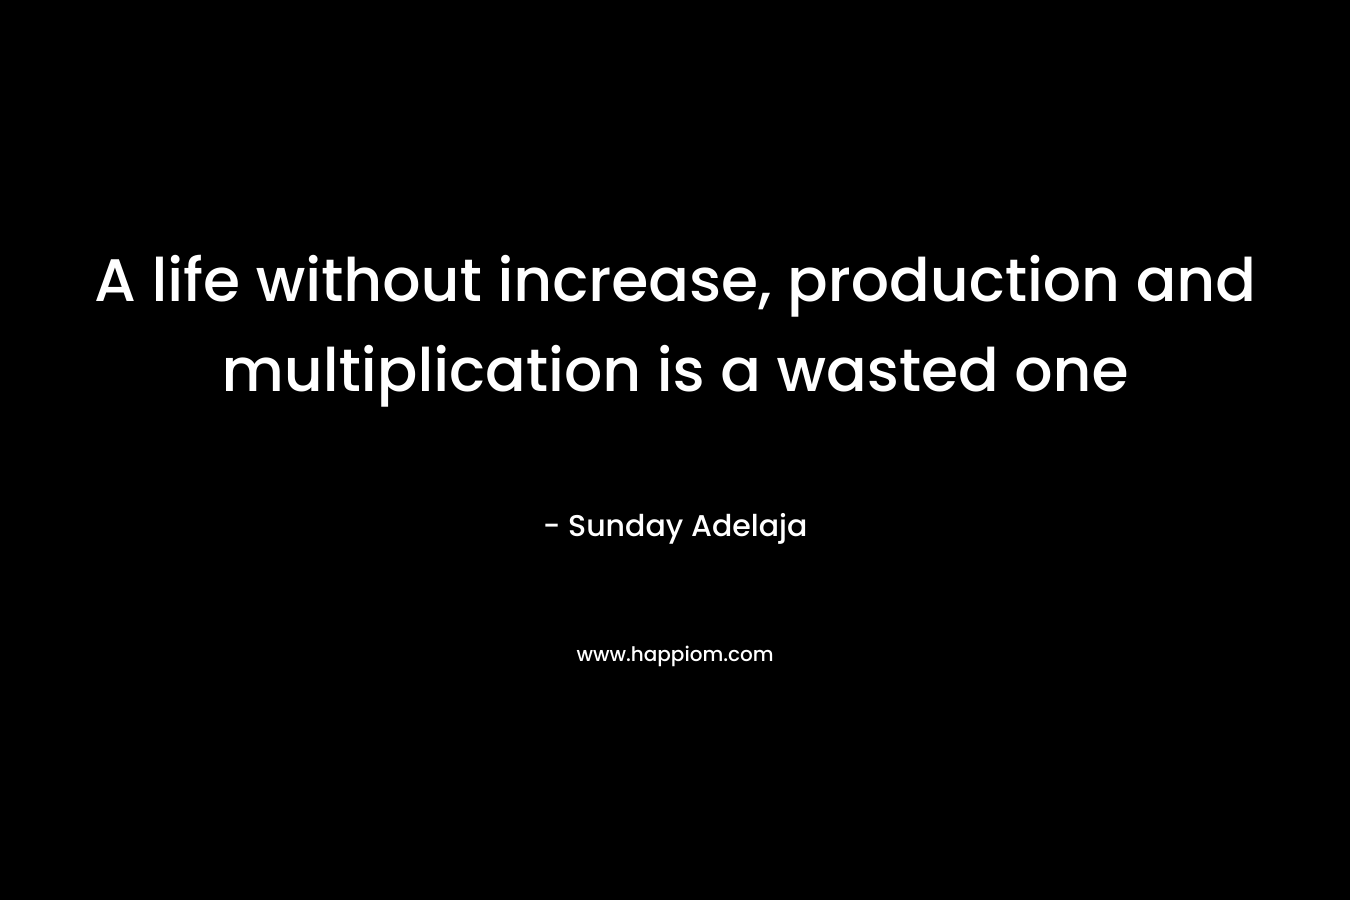 A life without increase, production and multiplication is a wasted one